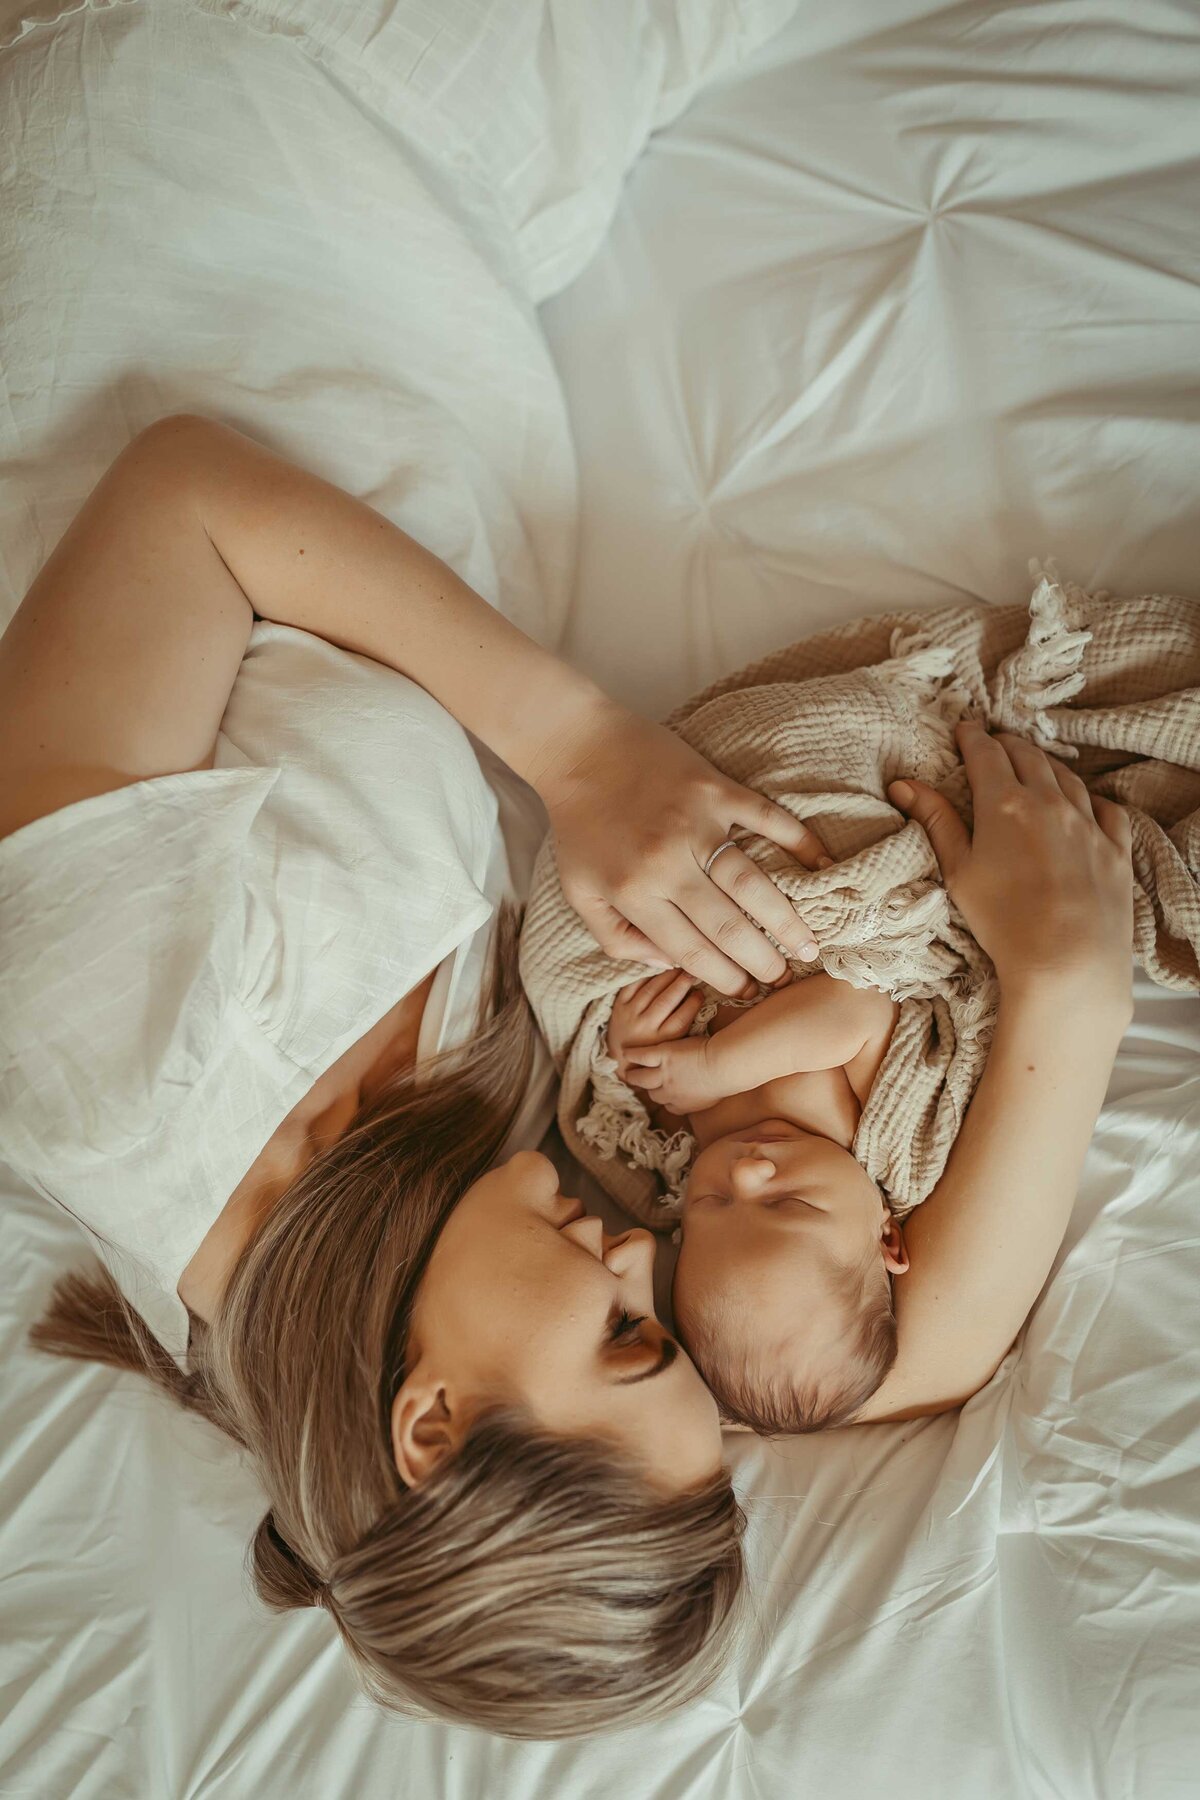 woman is laying on a bed wearing a white dress while holding her newborn baby who is sleeping and is wrapped in a light brown blanket